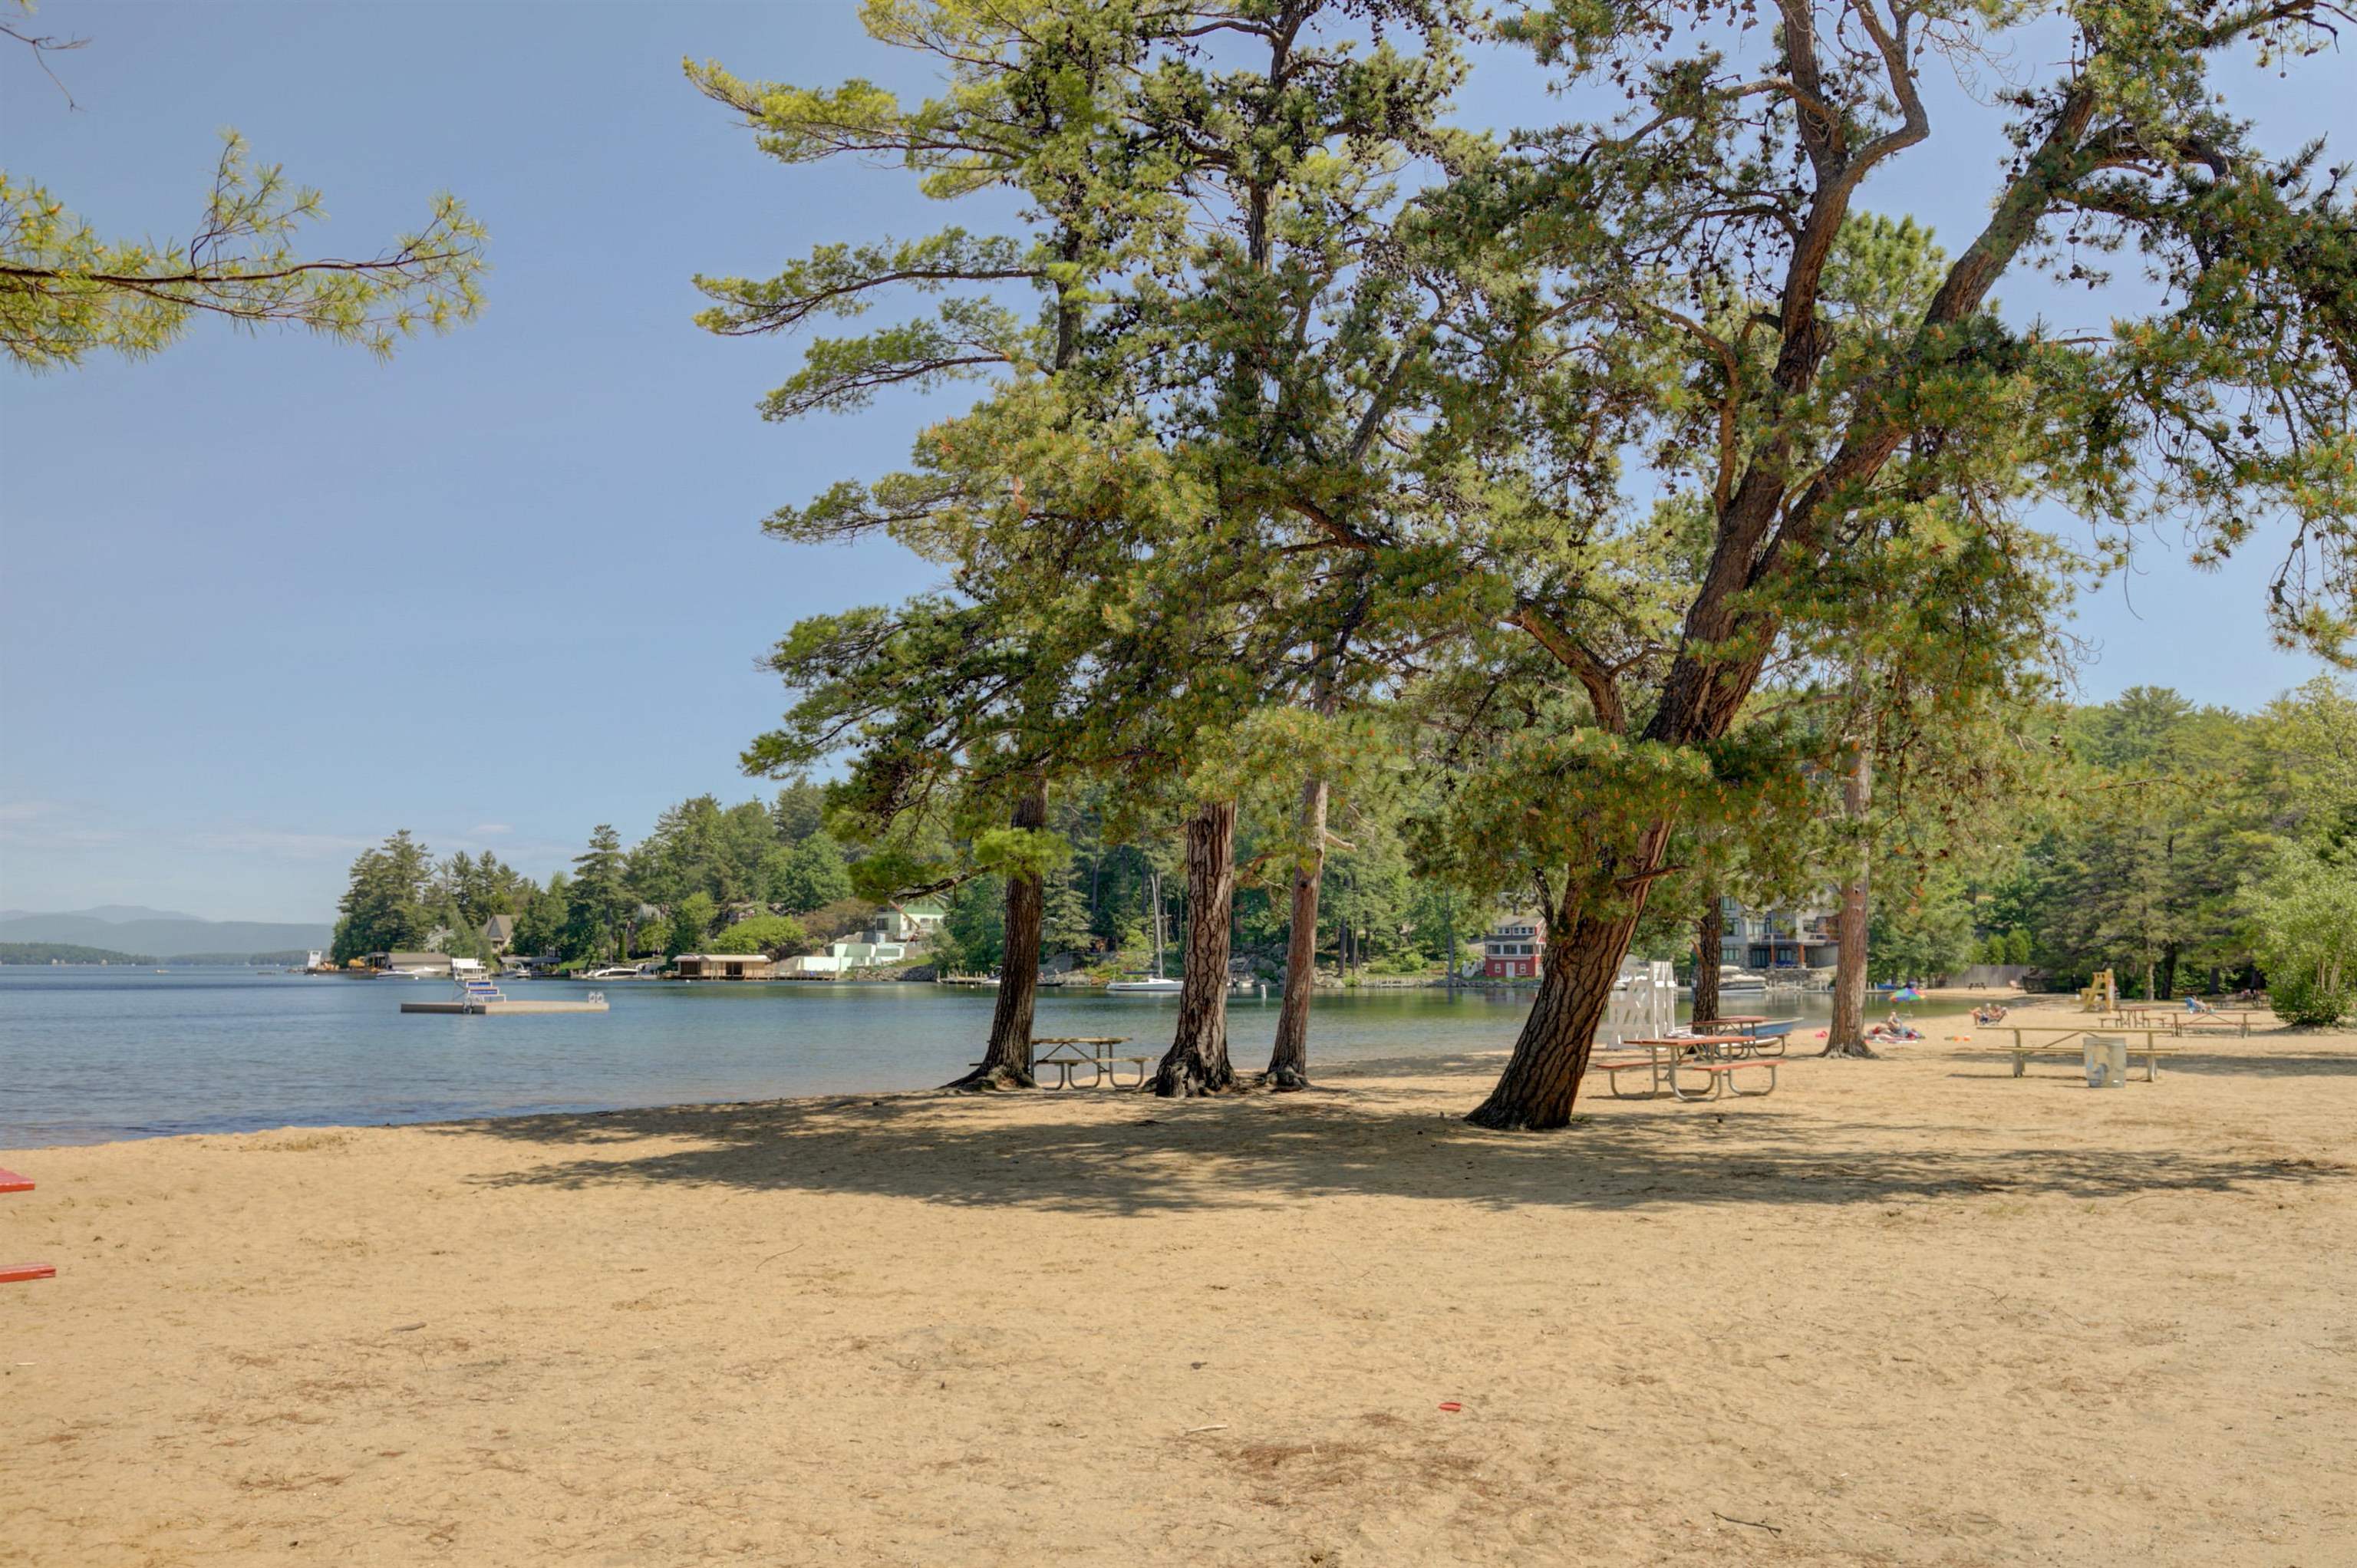 The Gilford Town beach and Ellacoya Beach nearby are scenic destinations.